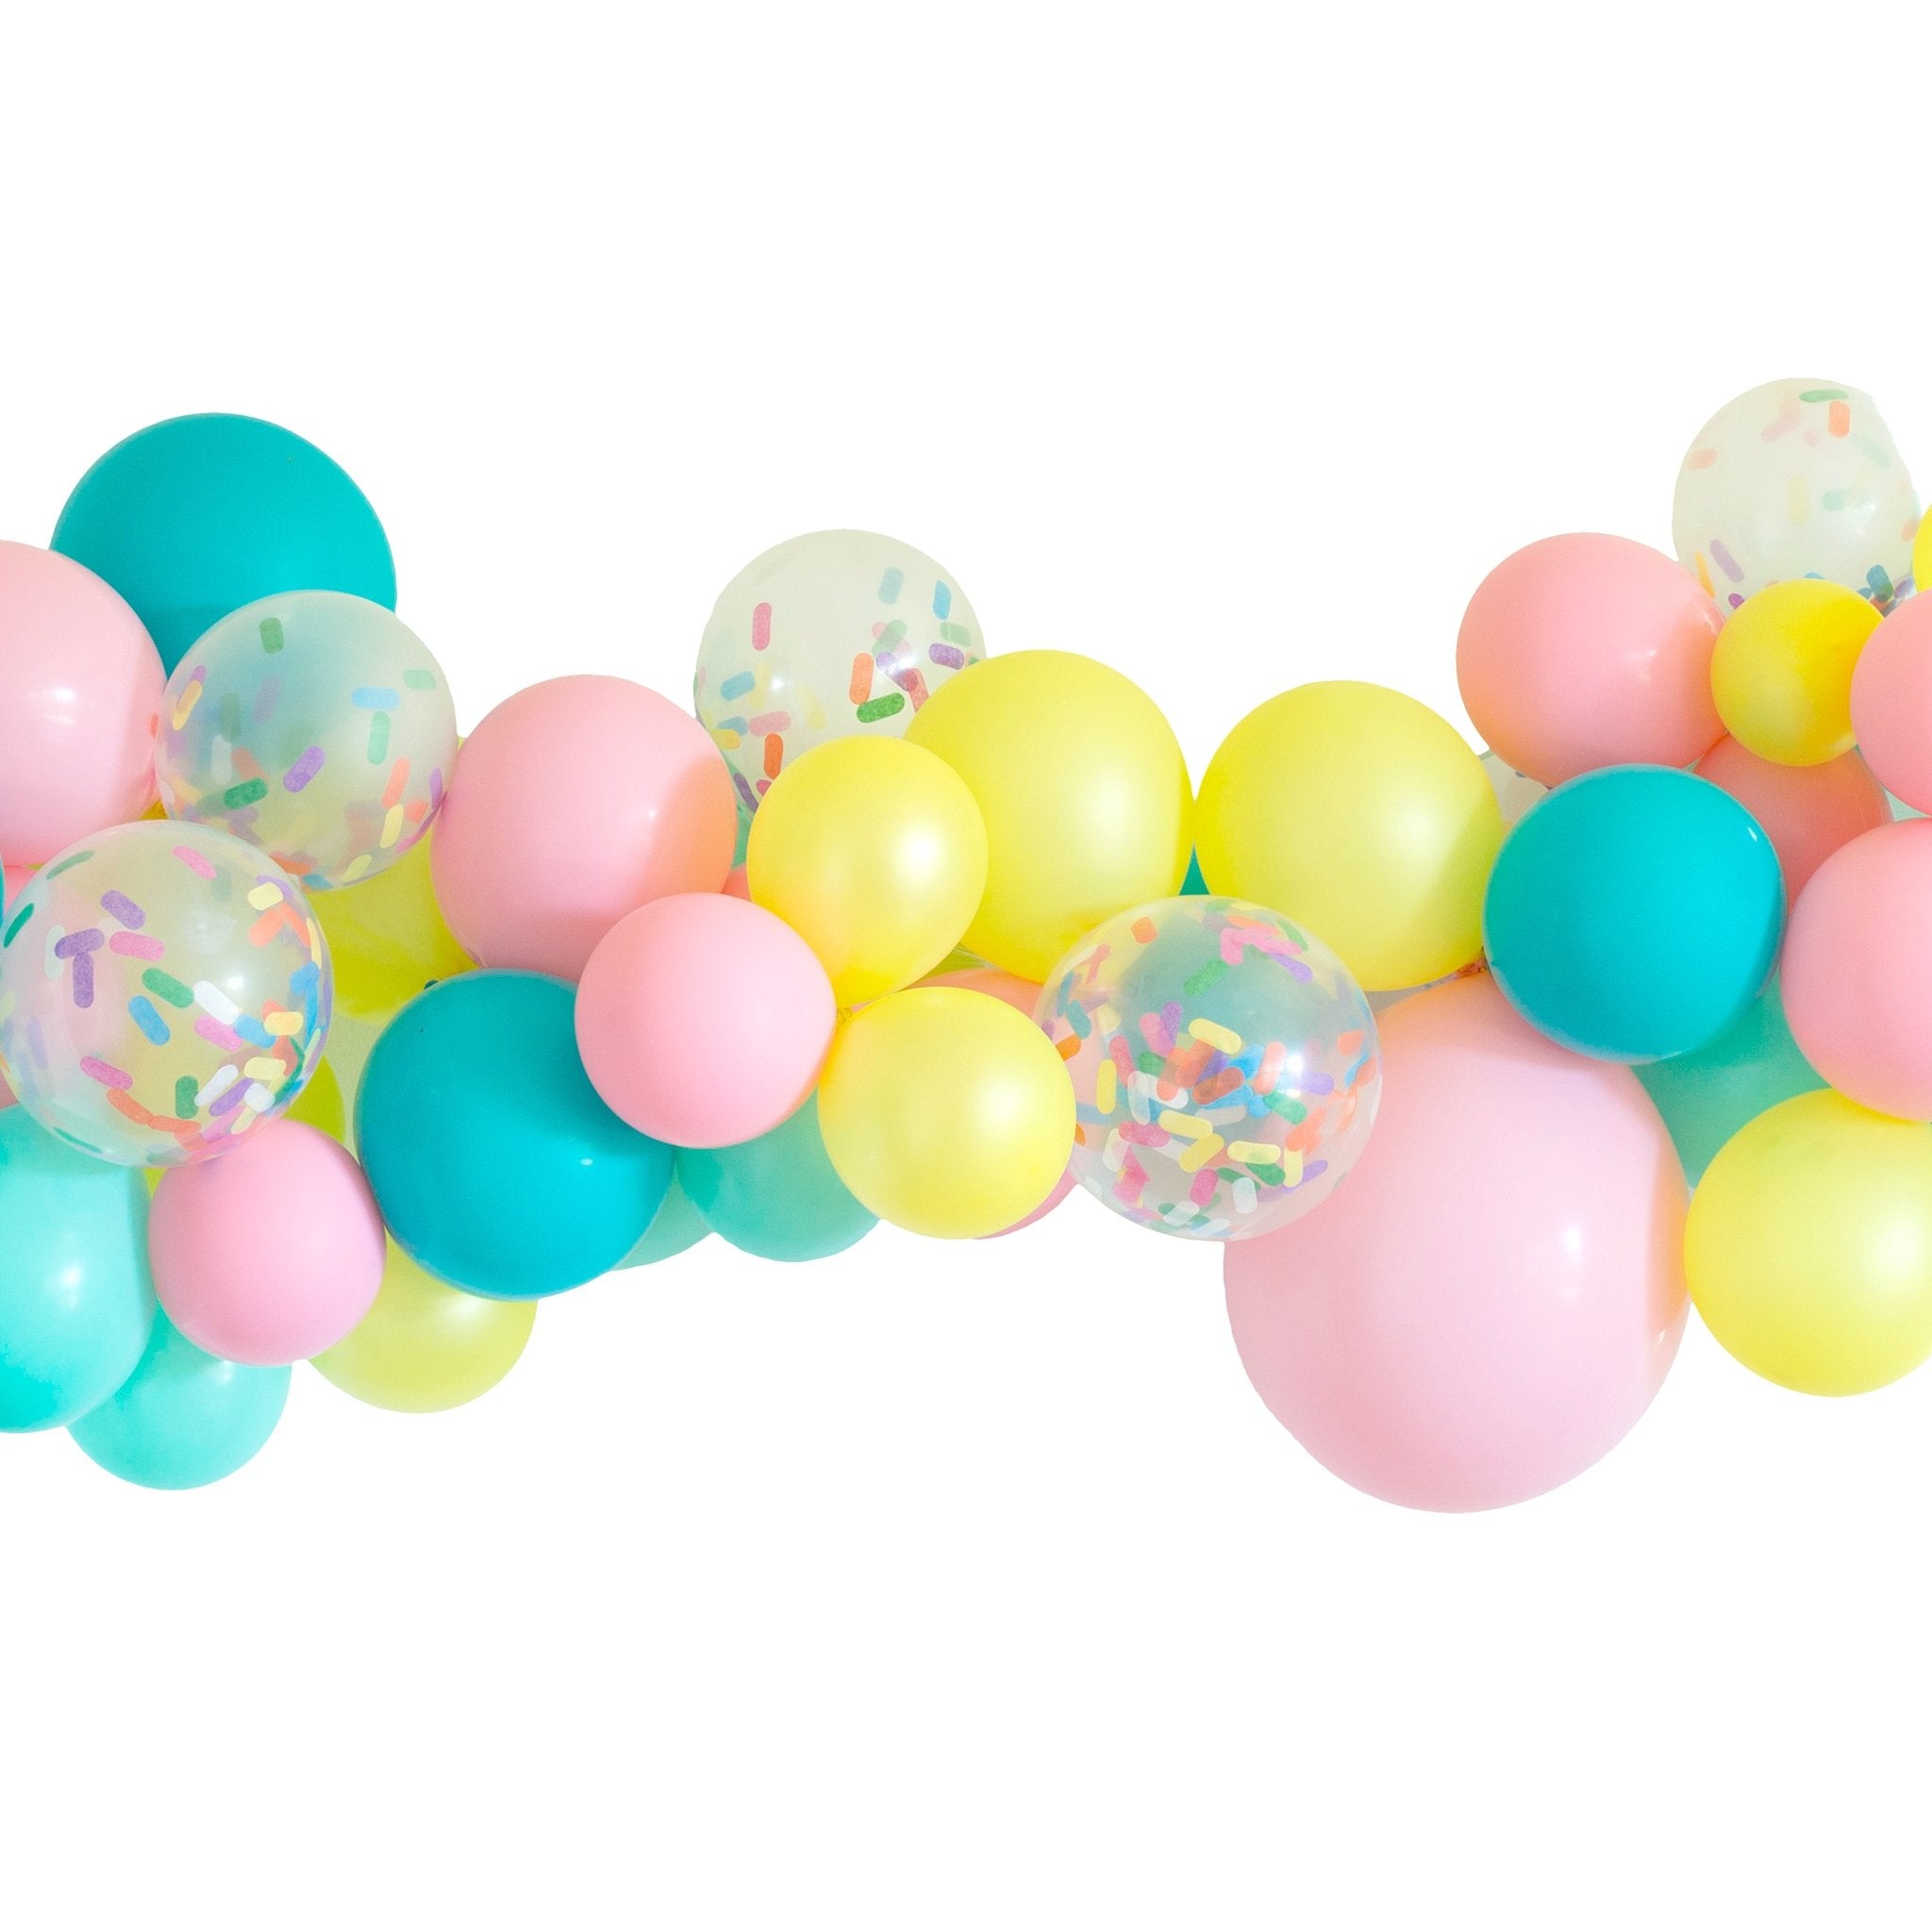 Ice Cream Balloon Garland - Oh My Darling Party Co-balloon garlandballoon kitballoons #Fringe_Backdrop#